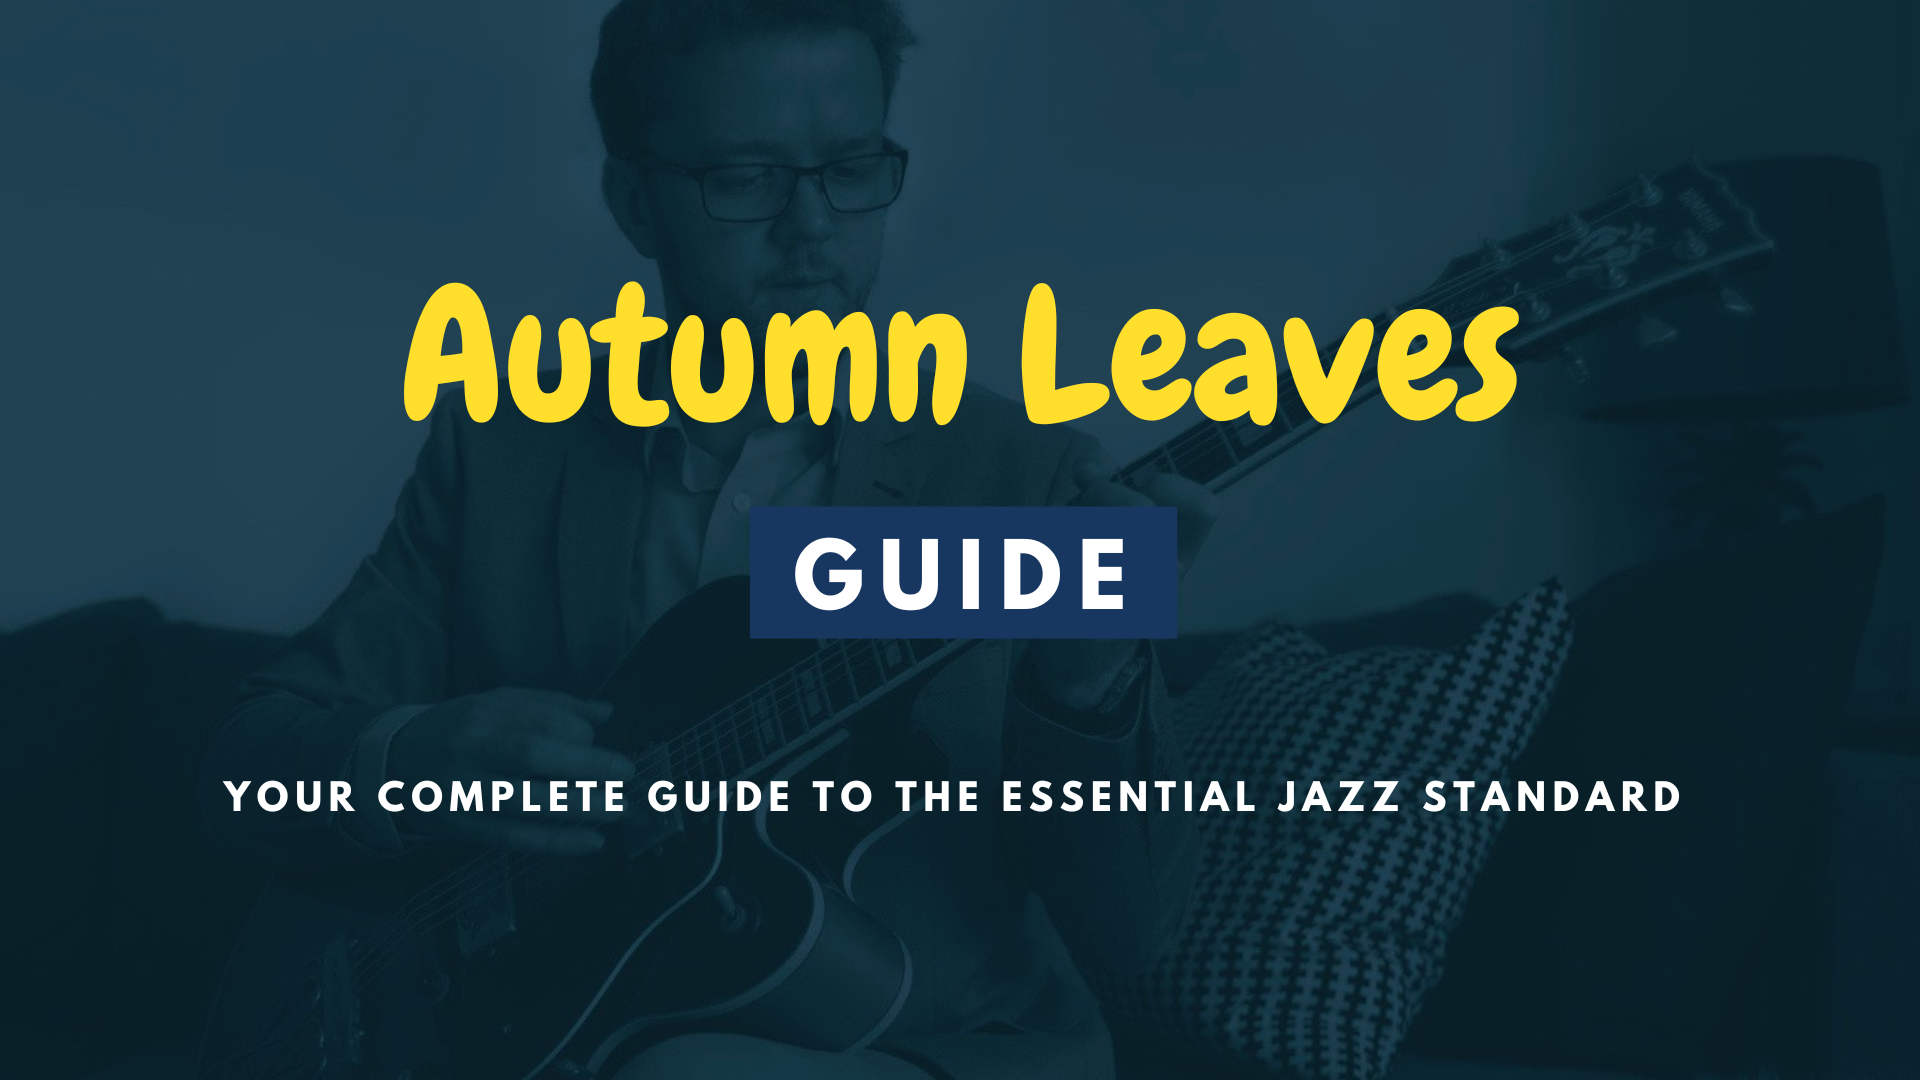 Autumn Leaves Guide